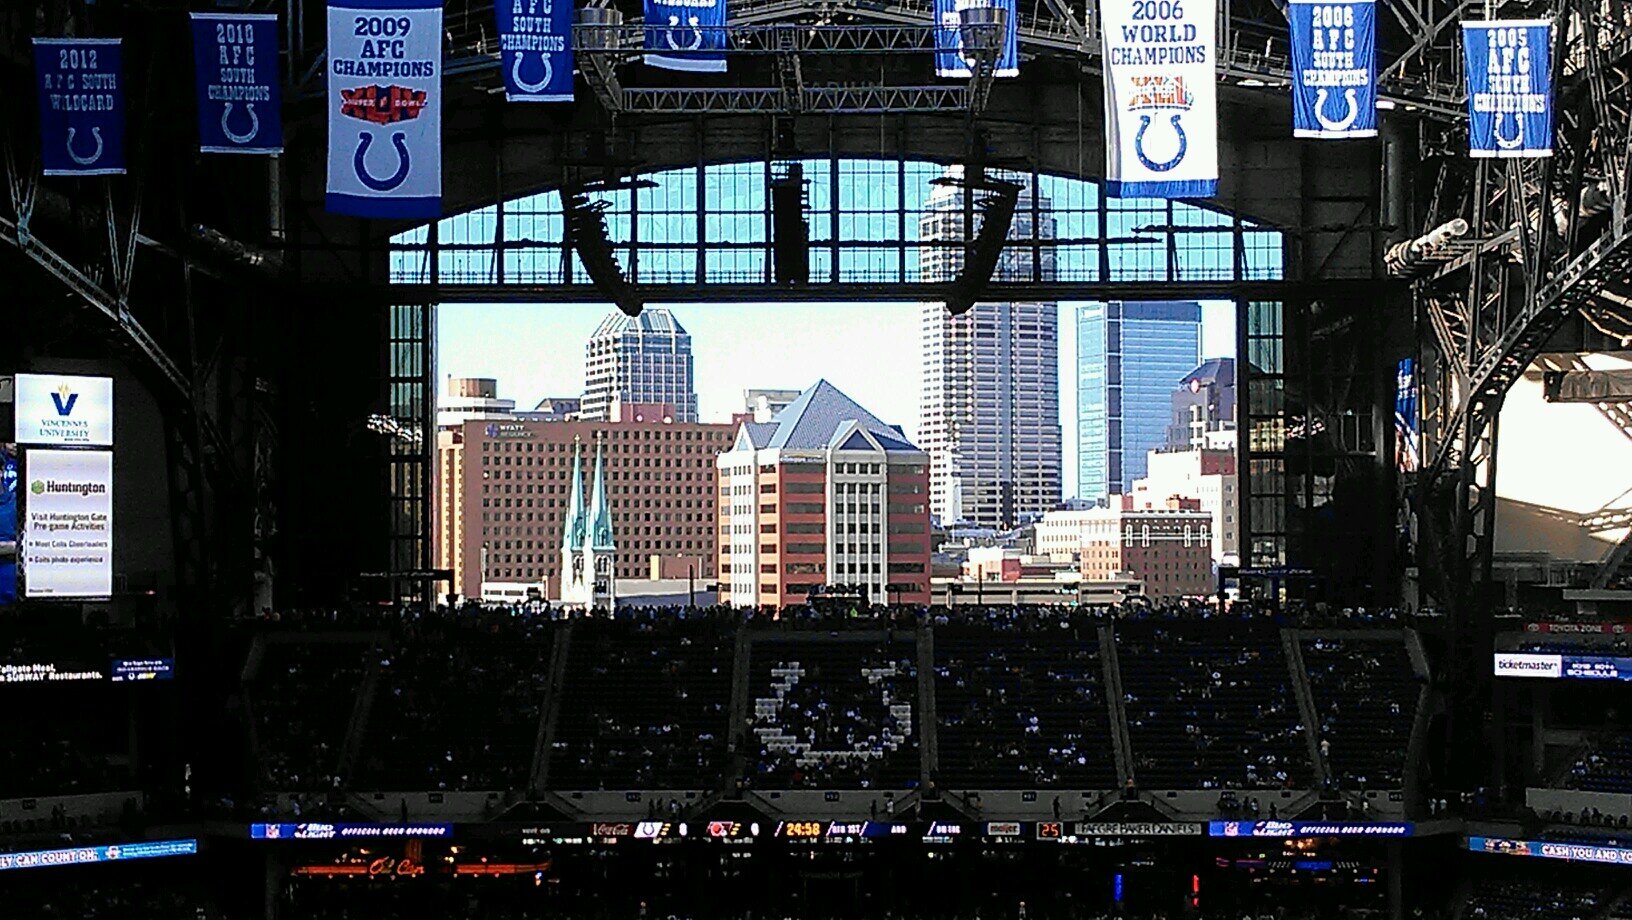 #Coltstrong #BTM Indy is the greatest SB cit. Lucas Oil best stadium in the world two years running